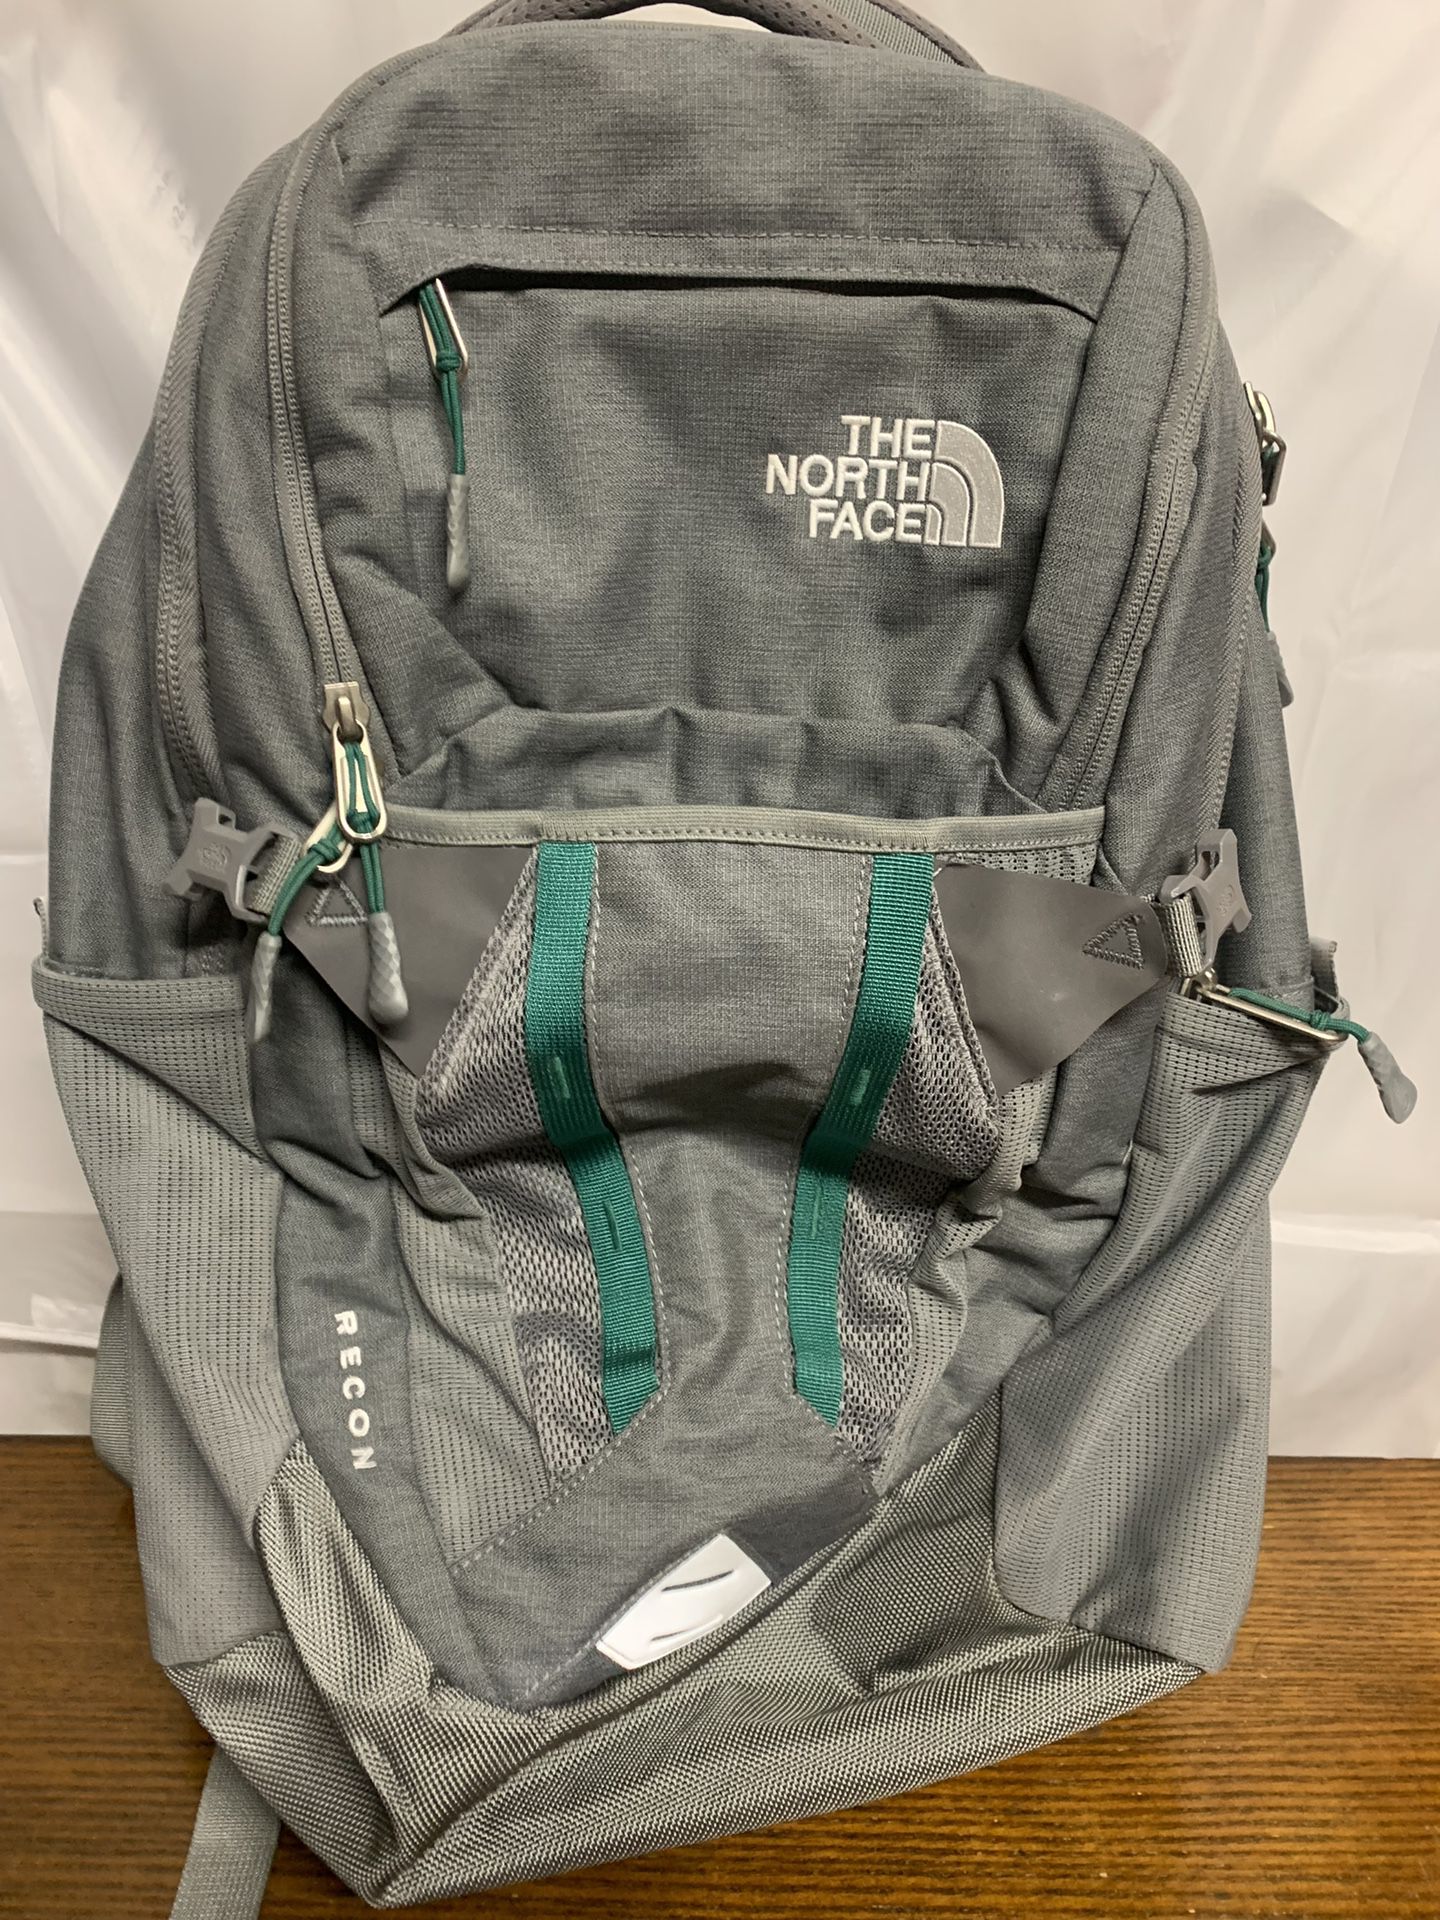 The North Face Recon FlexVent Backpack Multi Pocket Hiking Outdoors Grey